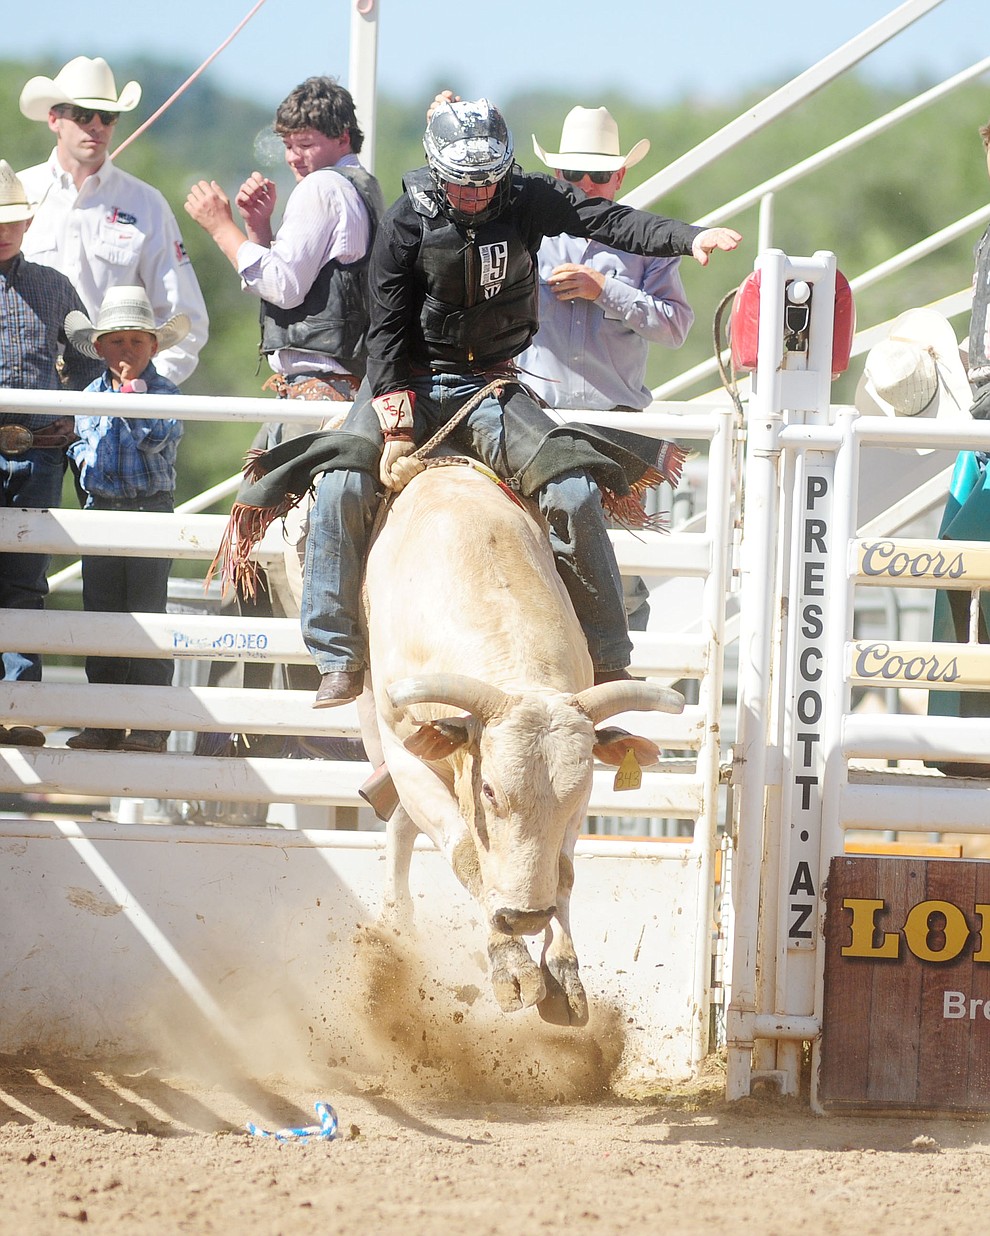 Jay Price on Smashing Success in the bull riding during the 8th and final performance of the Prescott Frontier Days Rodeo Tuesday, July 4 at the Prescott Rodeo Grounds.  (Les Stukenberg/Courier)